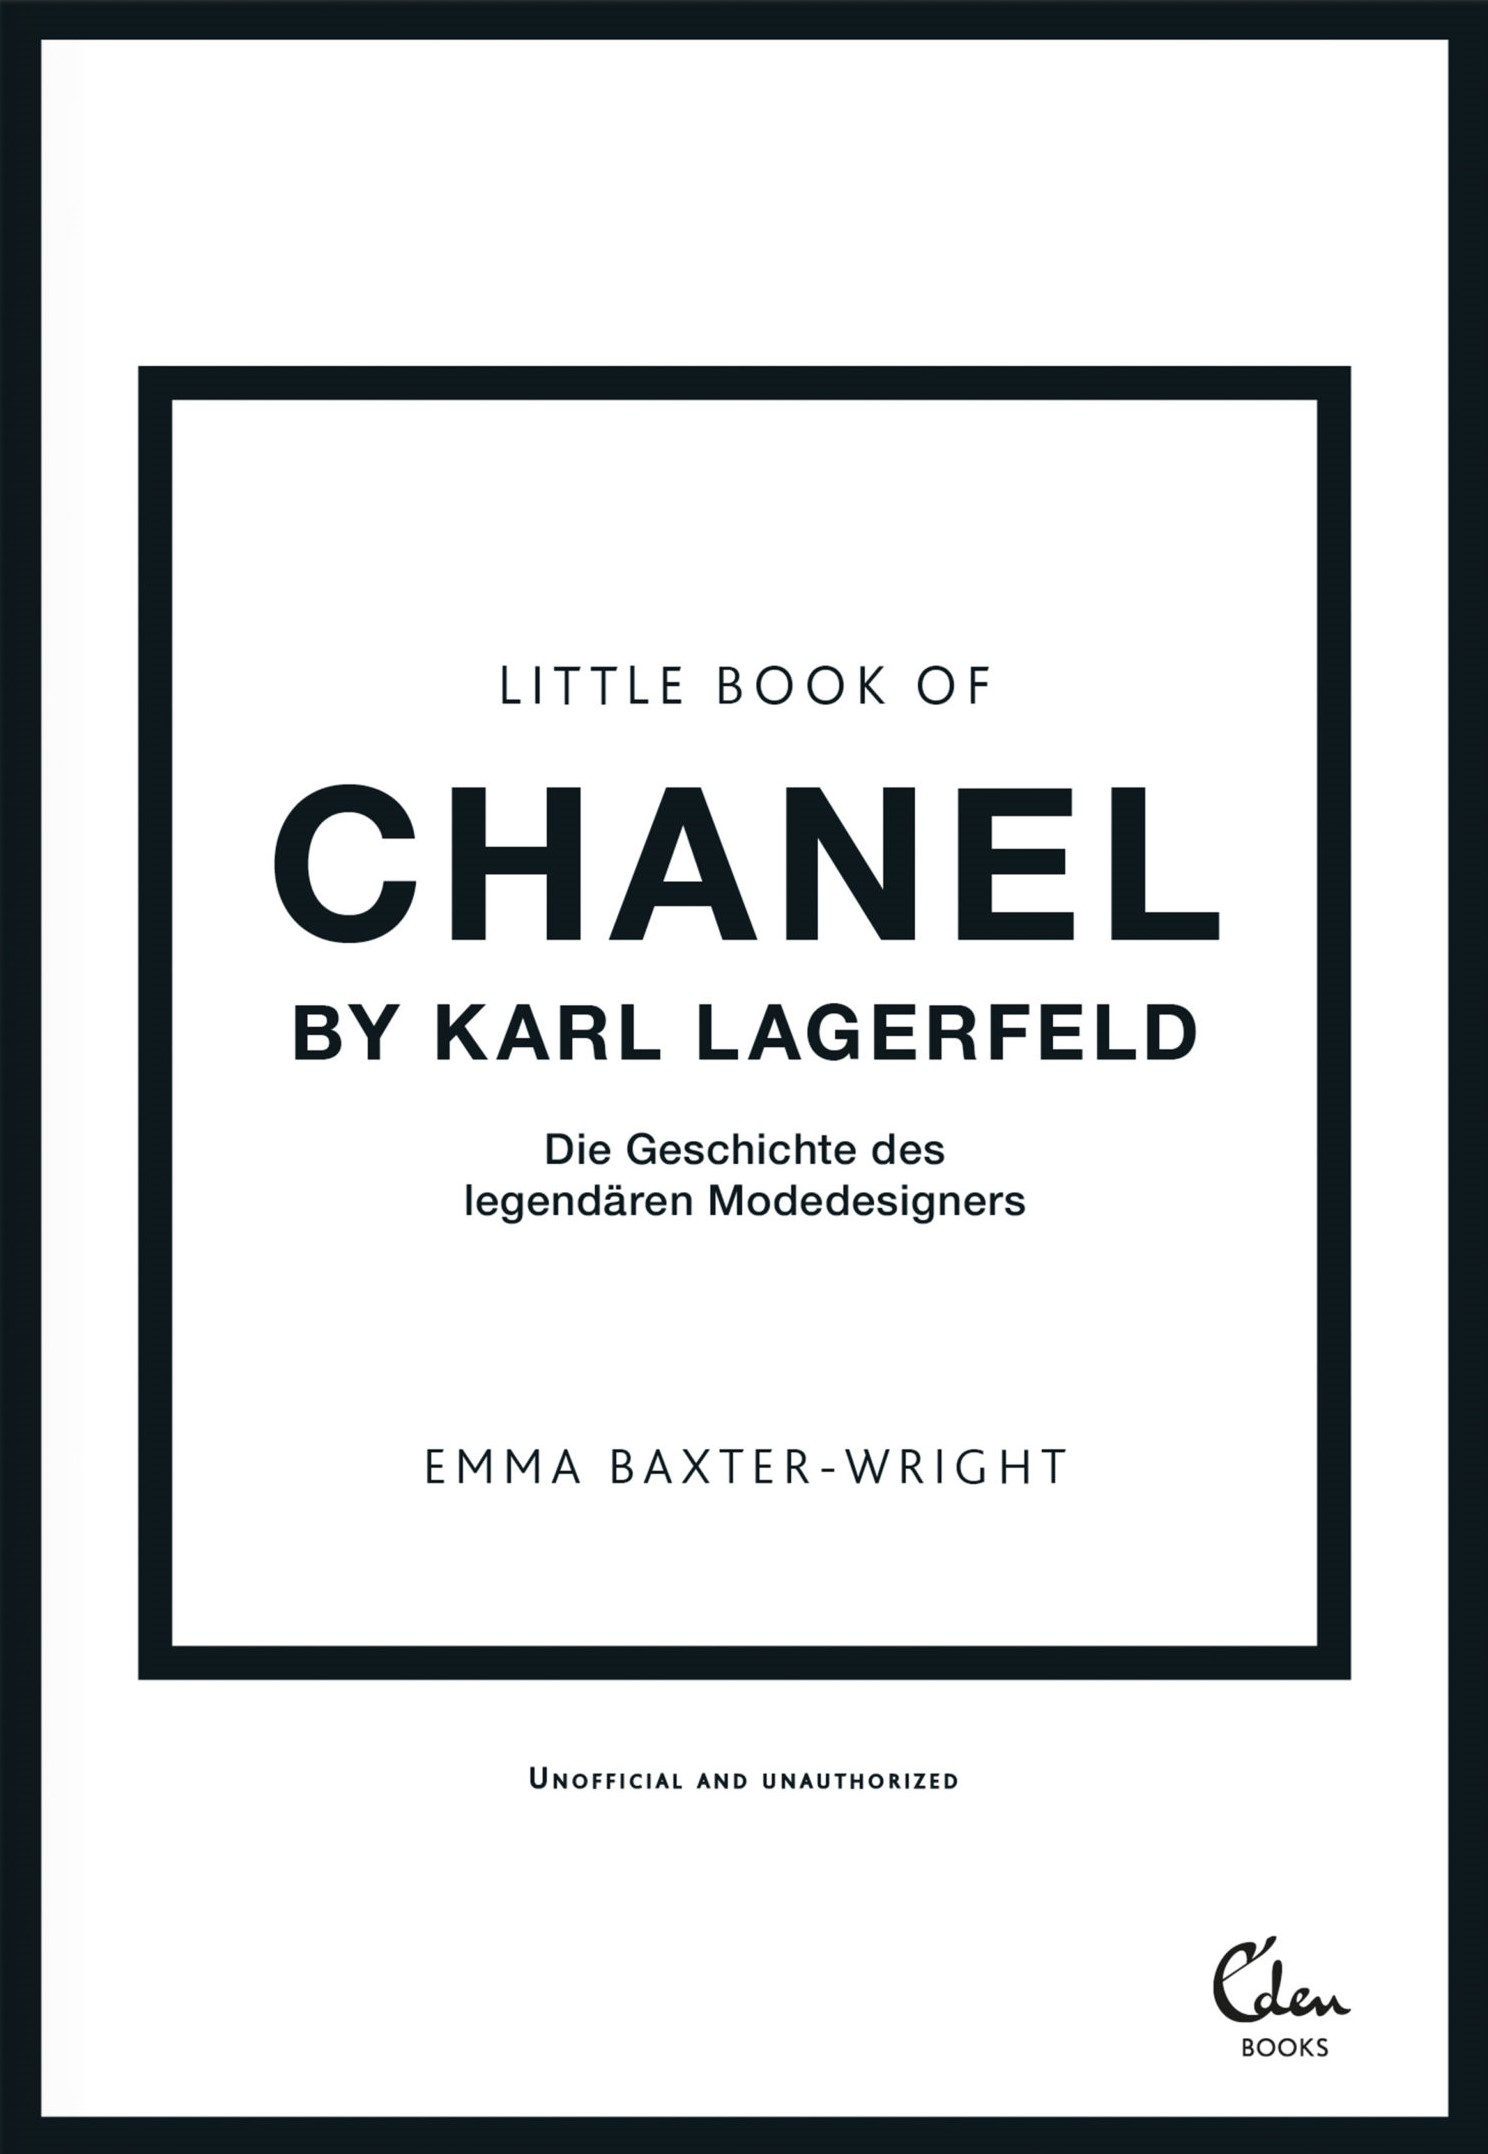 Buchcover: Emma Baxter-Wright: Little Book of Chanel by Lagerfeld  